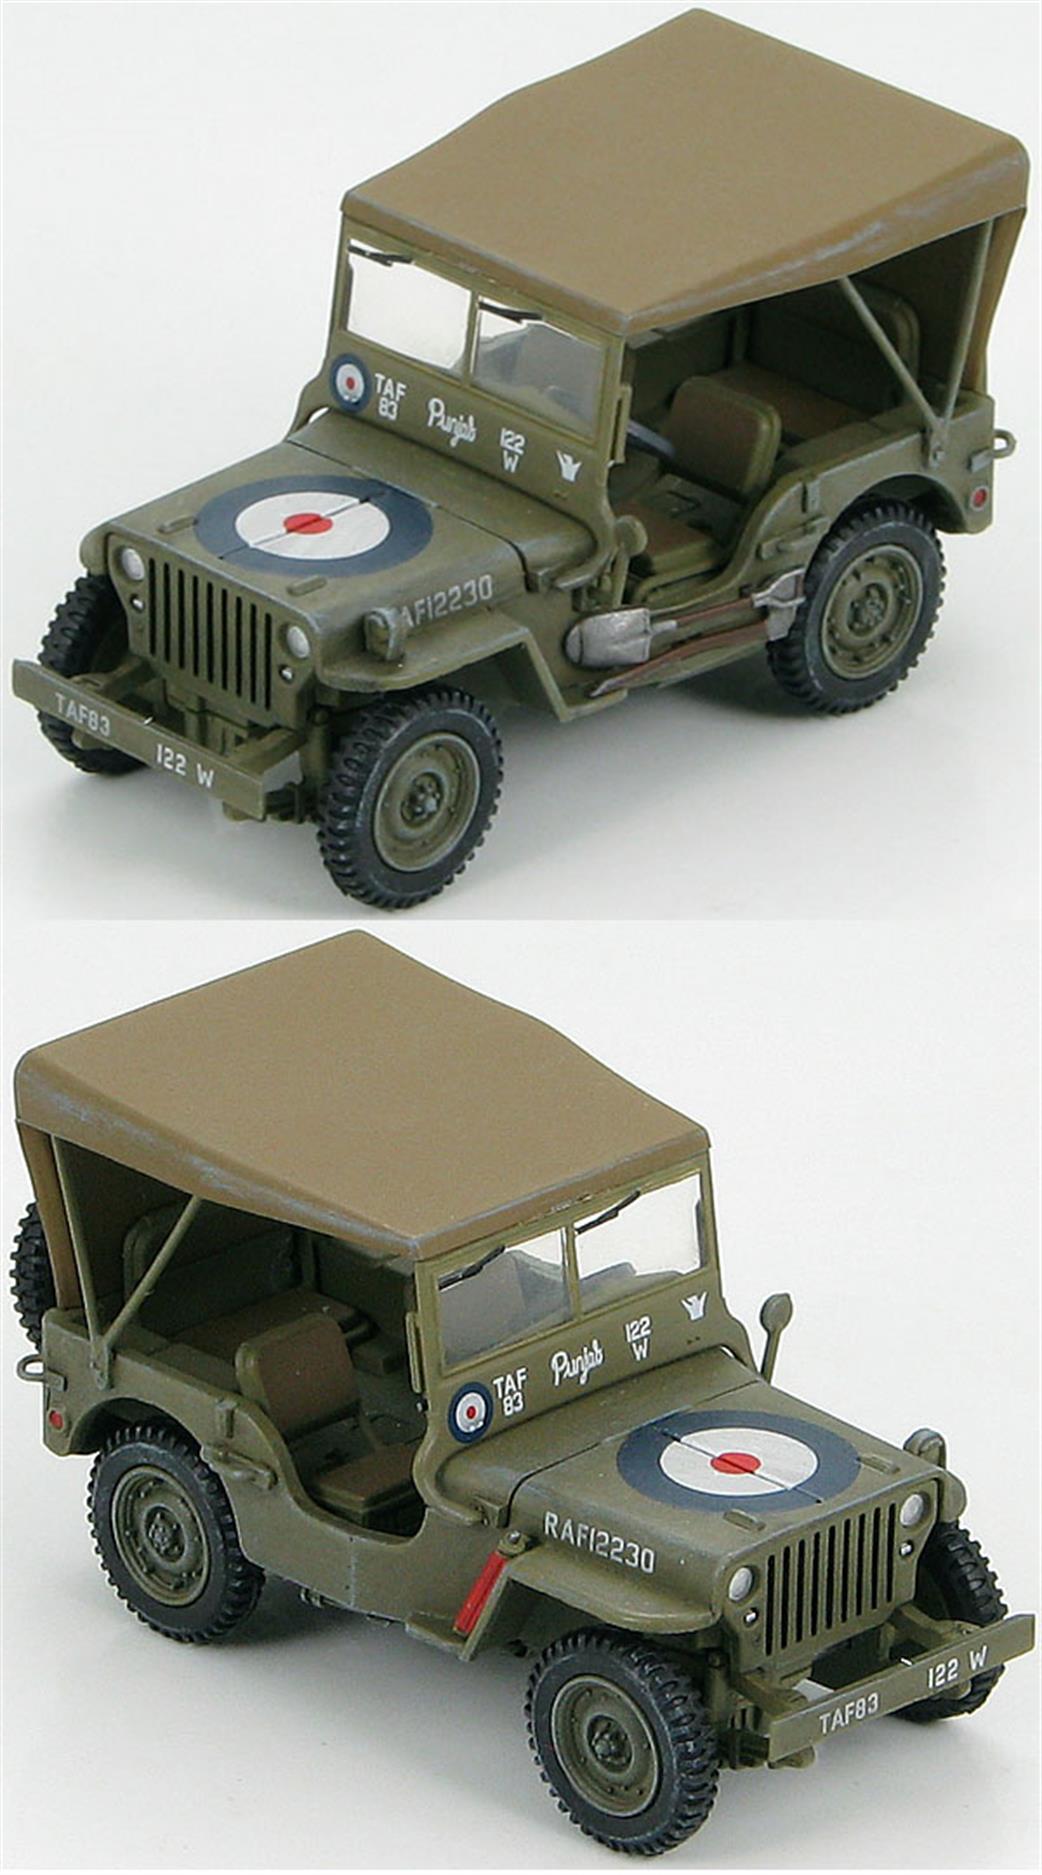 Hobby Master 1/48 HG1603 Willys MB Jeep RAF 12230, WWII